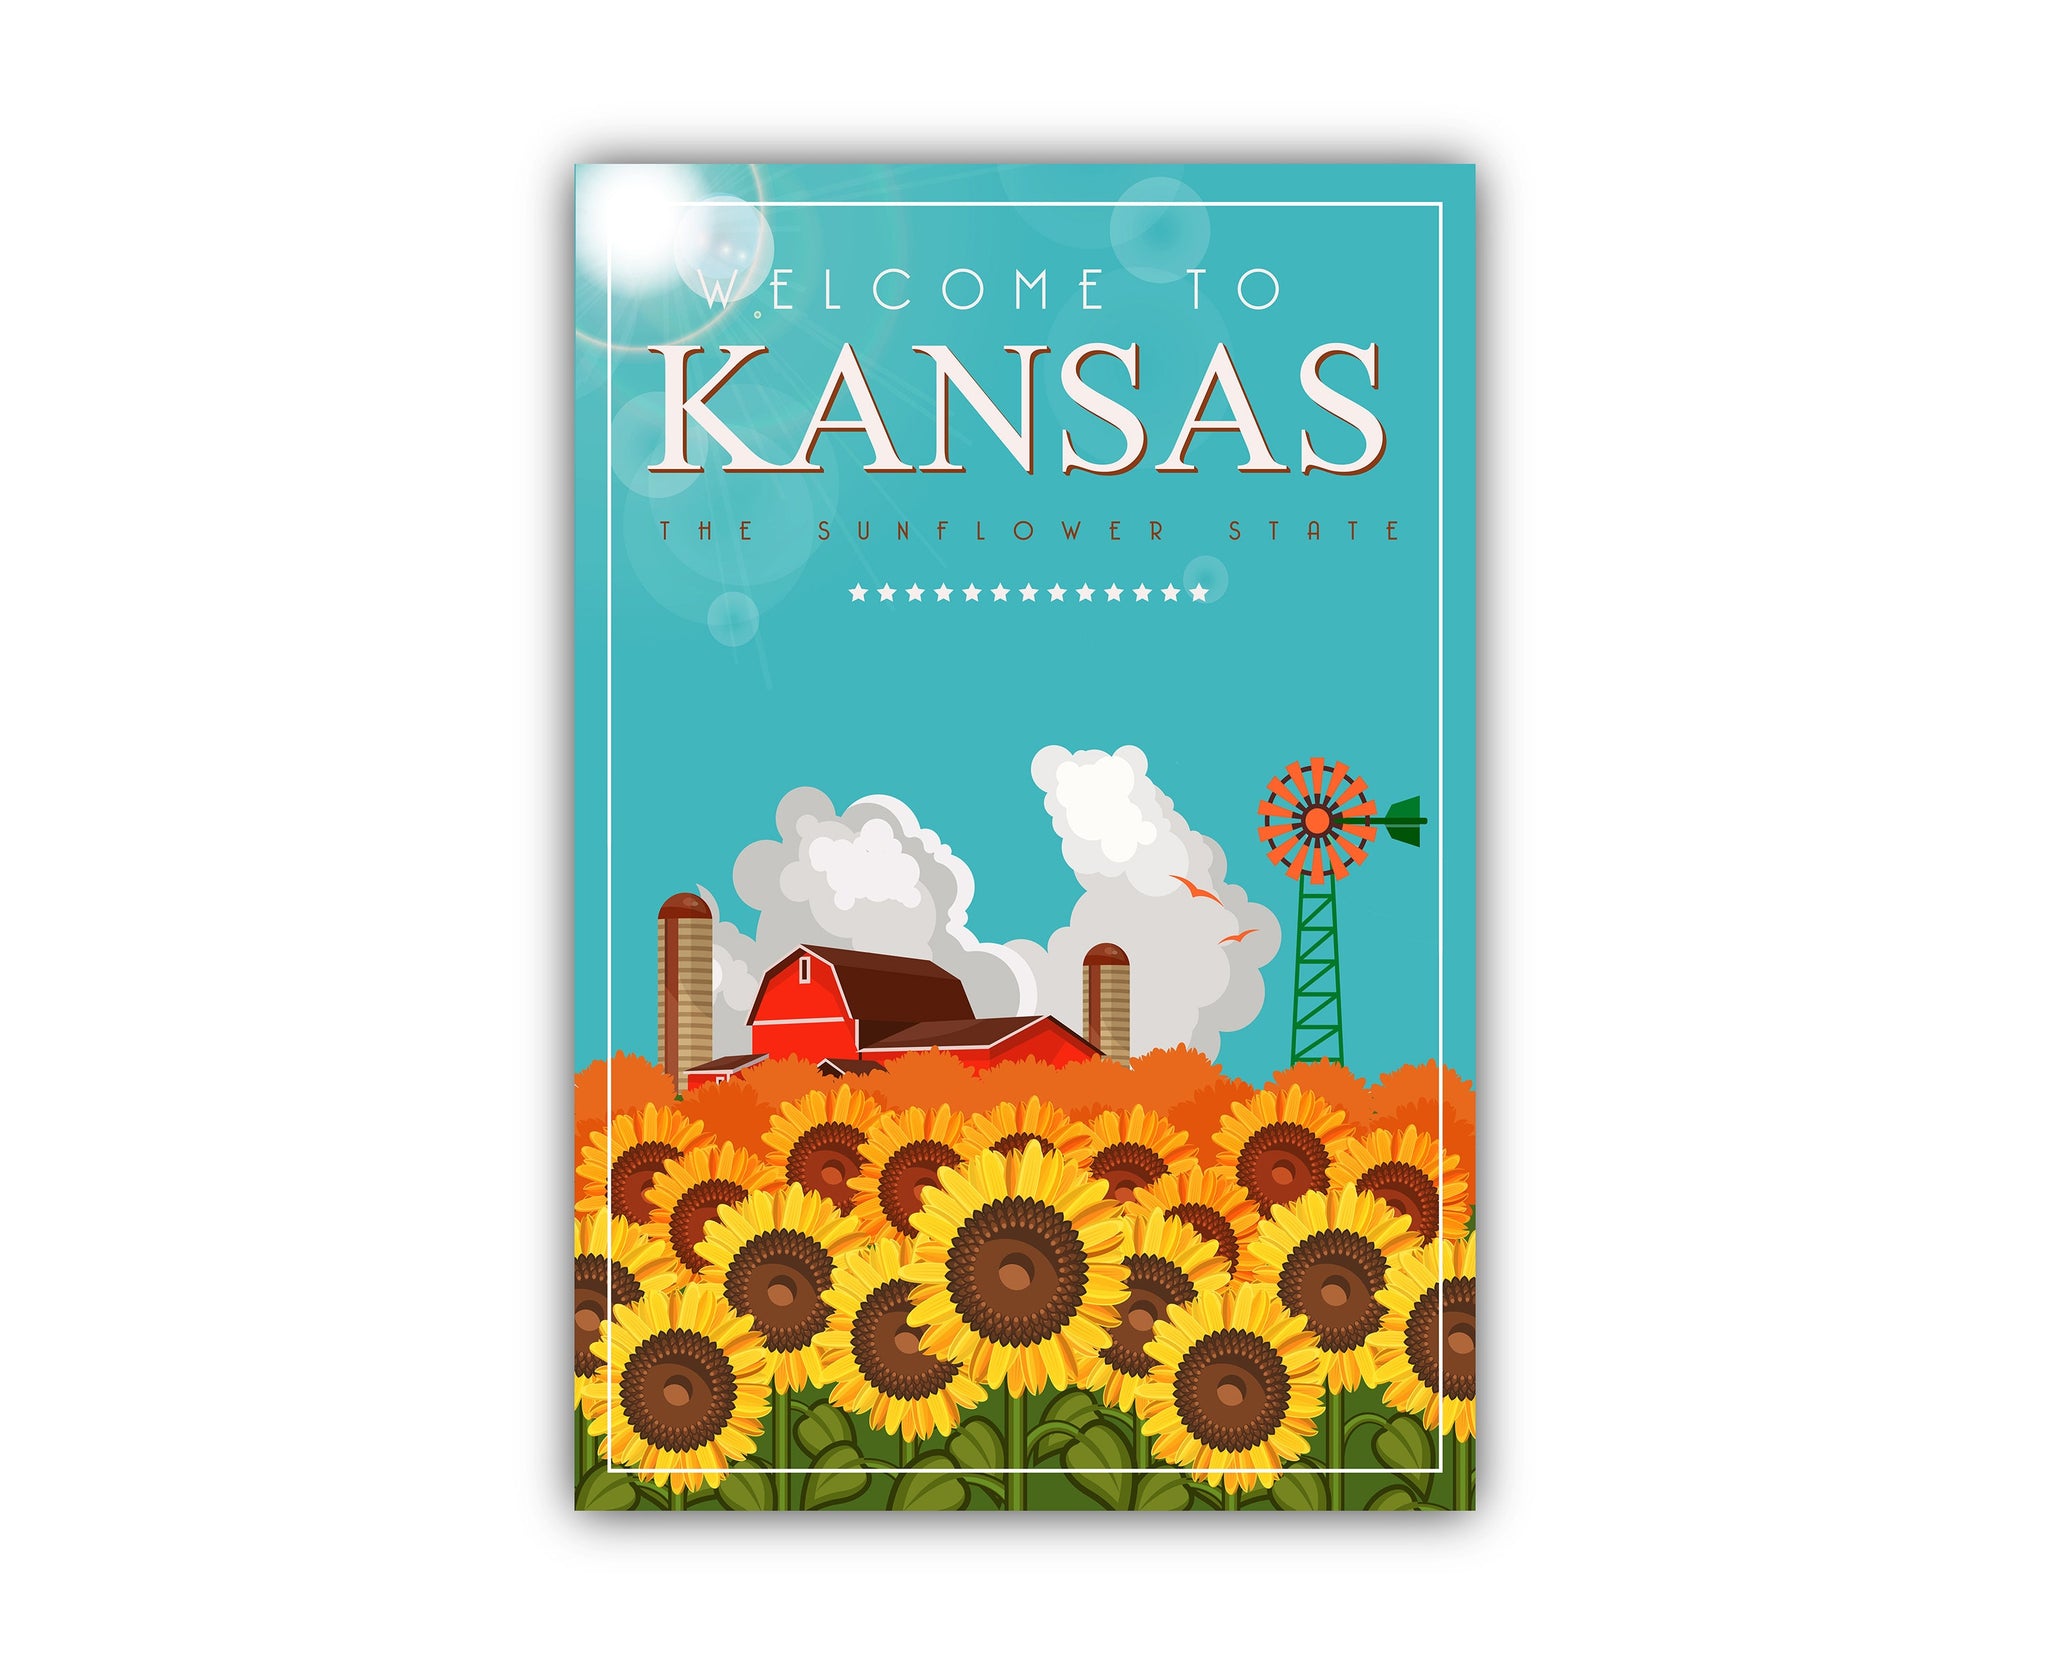 Retro Style Travel Poster, Kansas Vintage Rustic Poster Print, Home Wall Art, Office Wall Decor, Posters, Kansas, State Map Poster Printing